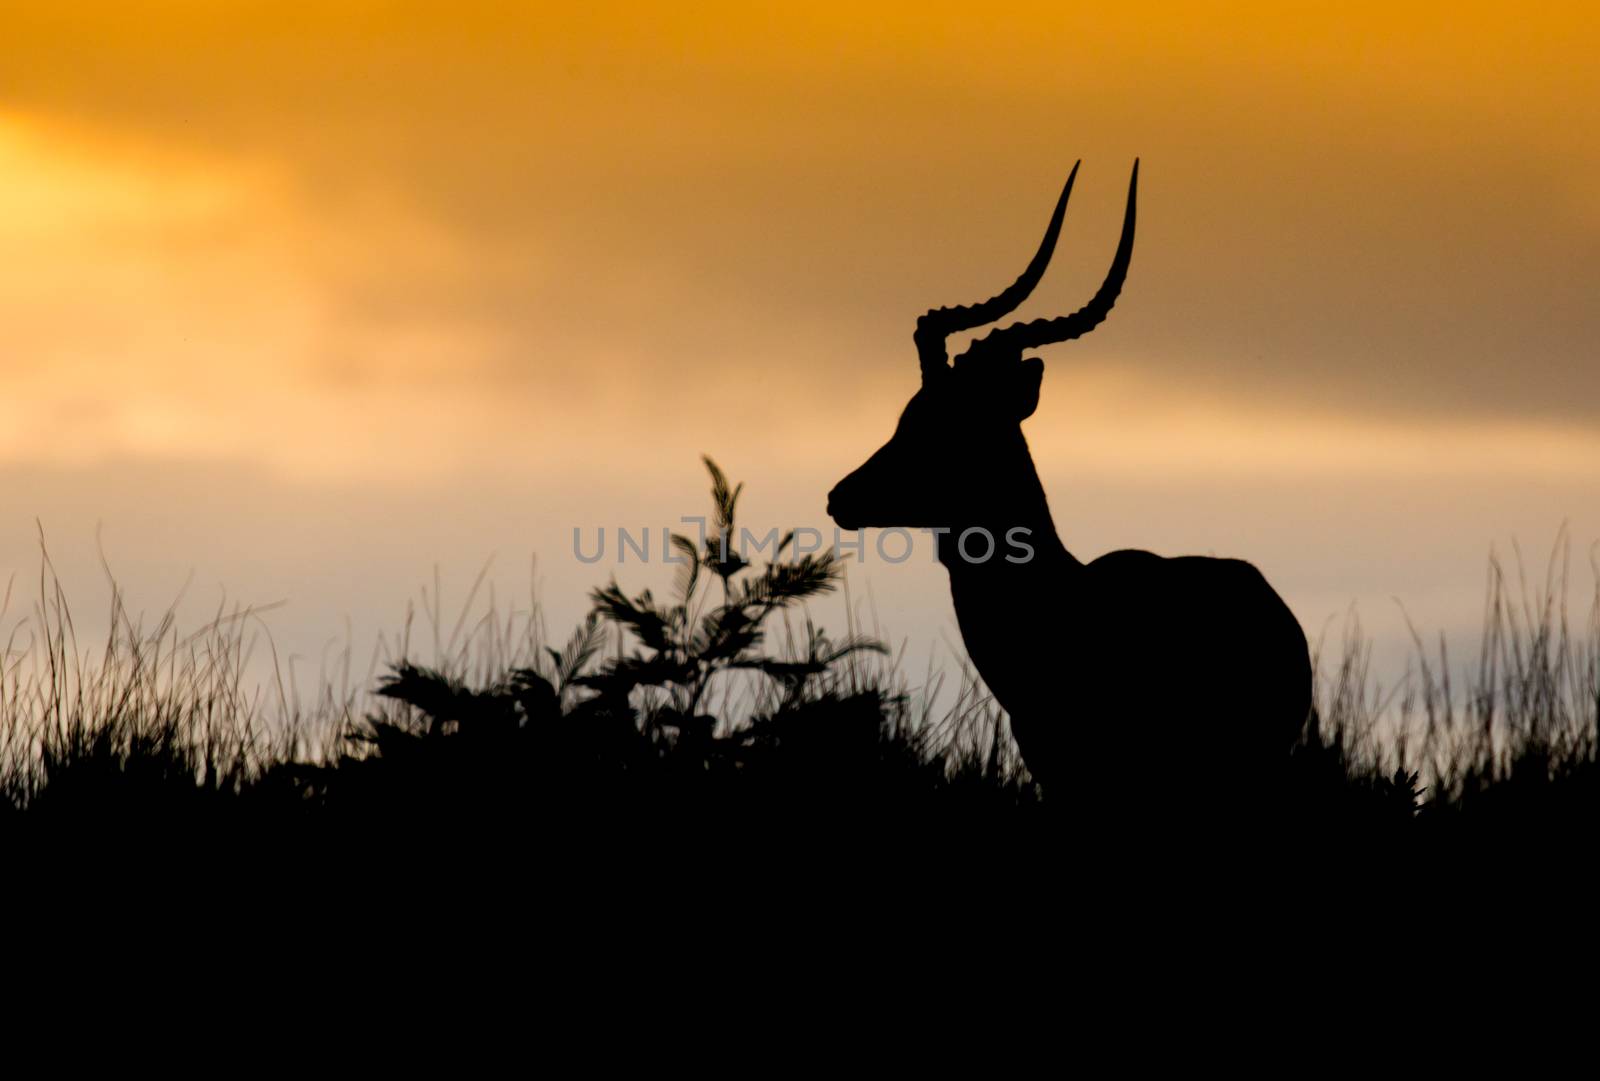 Impala antelope with long horns silhouetted against African sunset sky